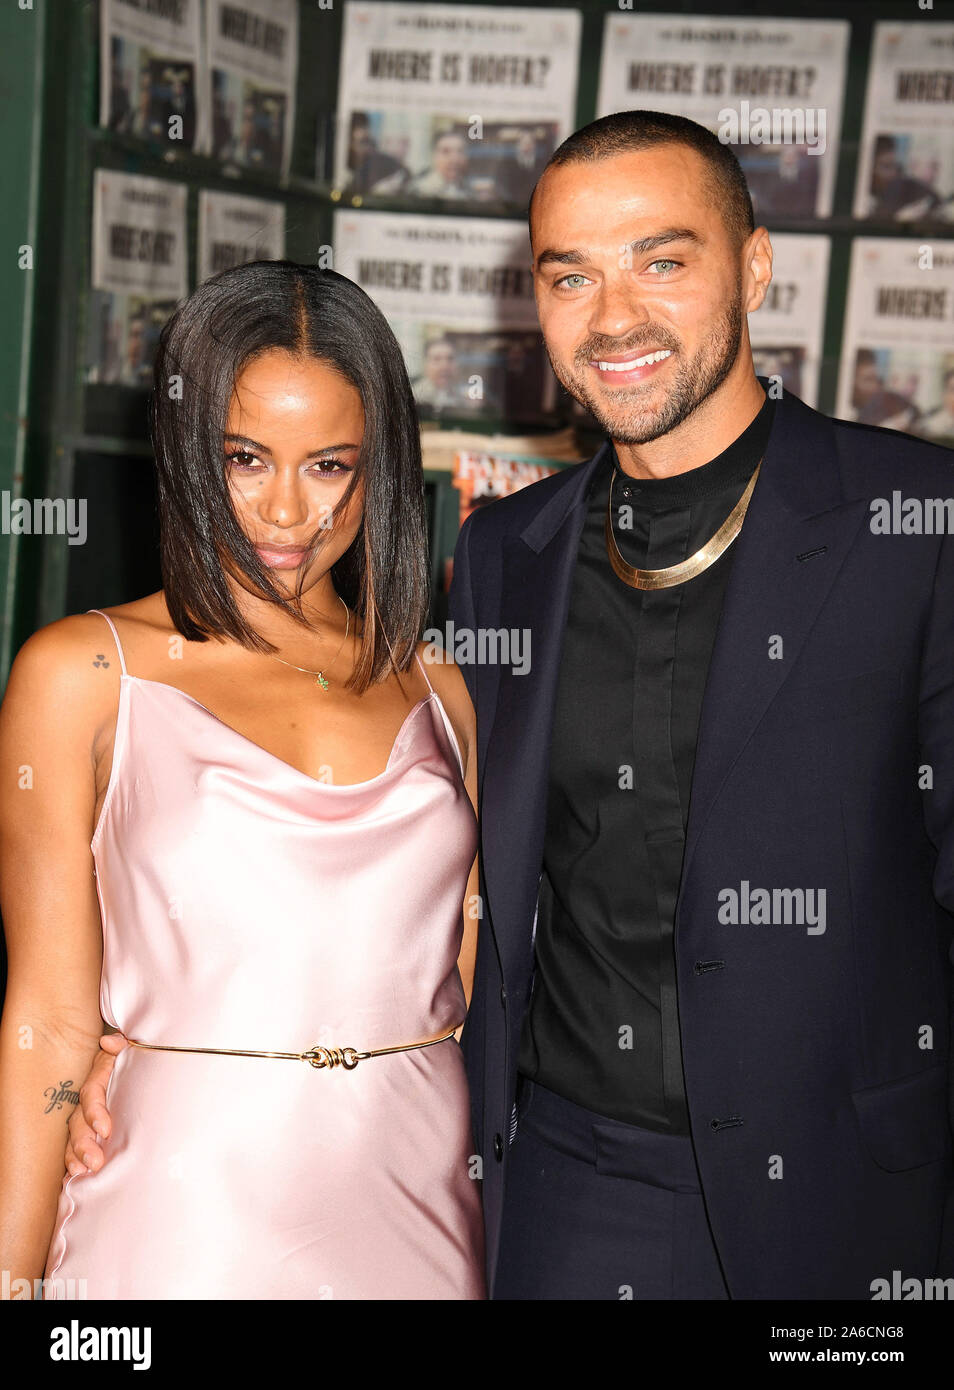 HOLLYWOOD, CA - OCTOBER 24: Jesse Williams (R) and Taylour Paige attend the premiere of Netflix's 'The Irishman' at TCL Chinese Theatre on October 24, 2019 in Hollywood, California. Stock Photo